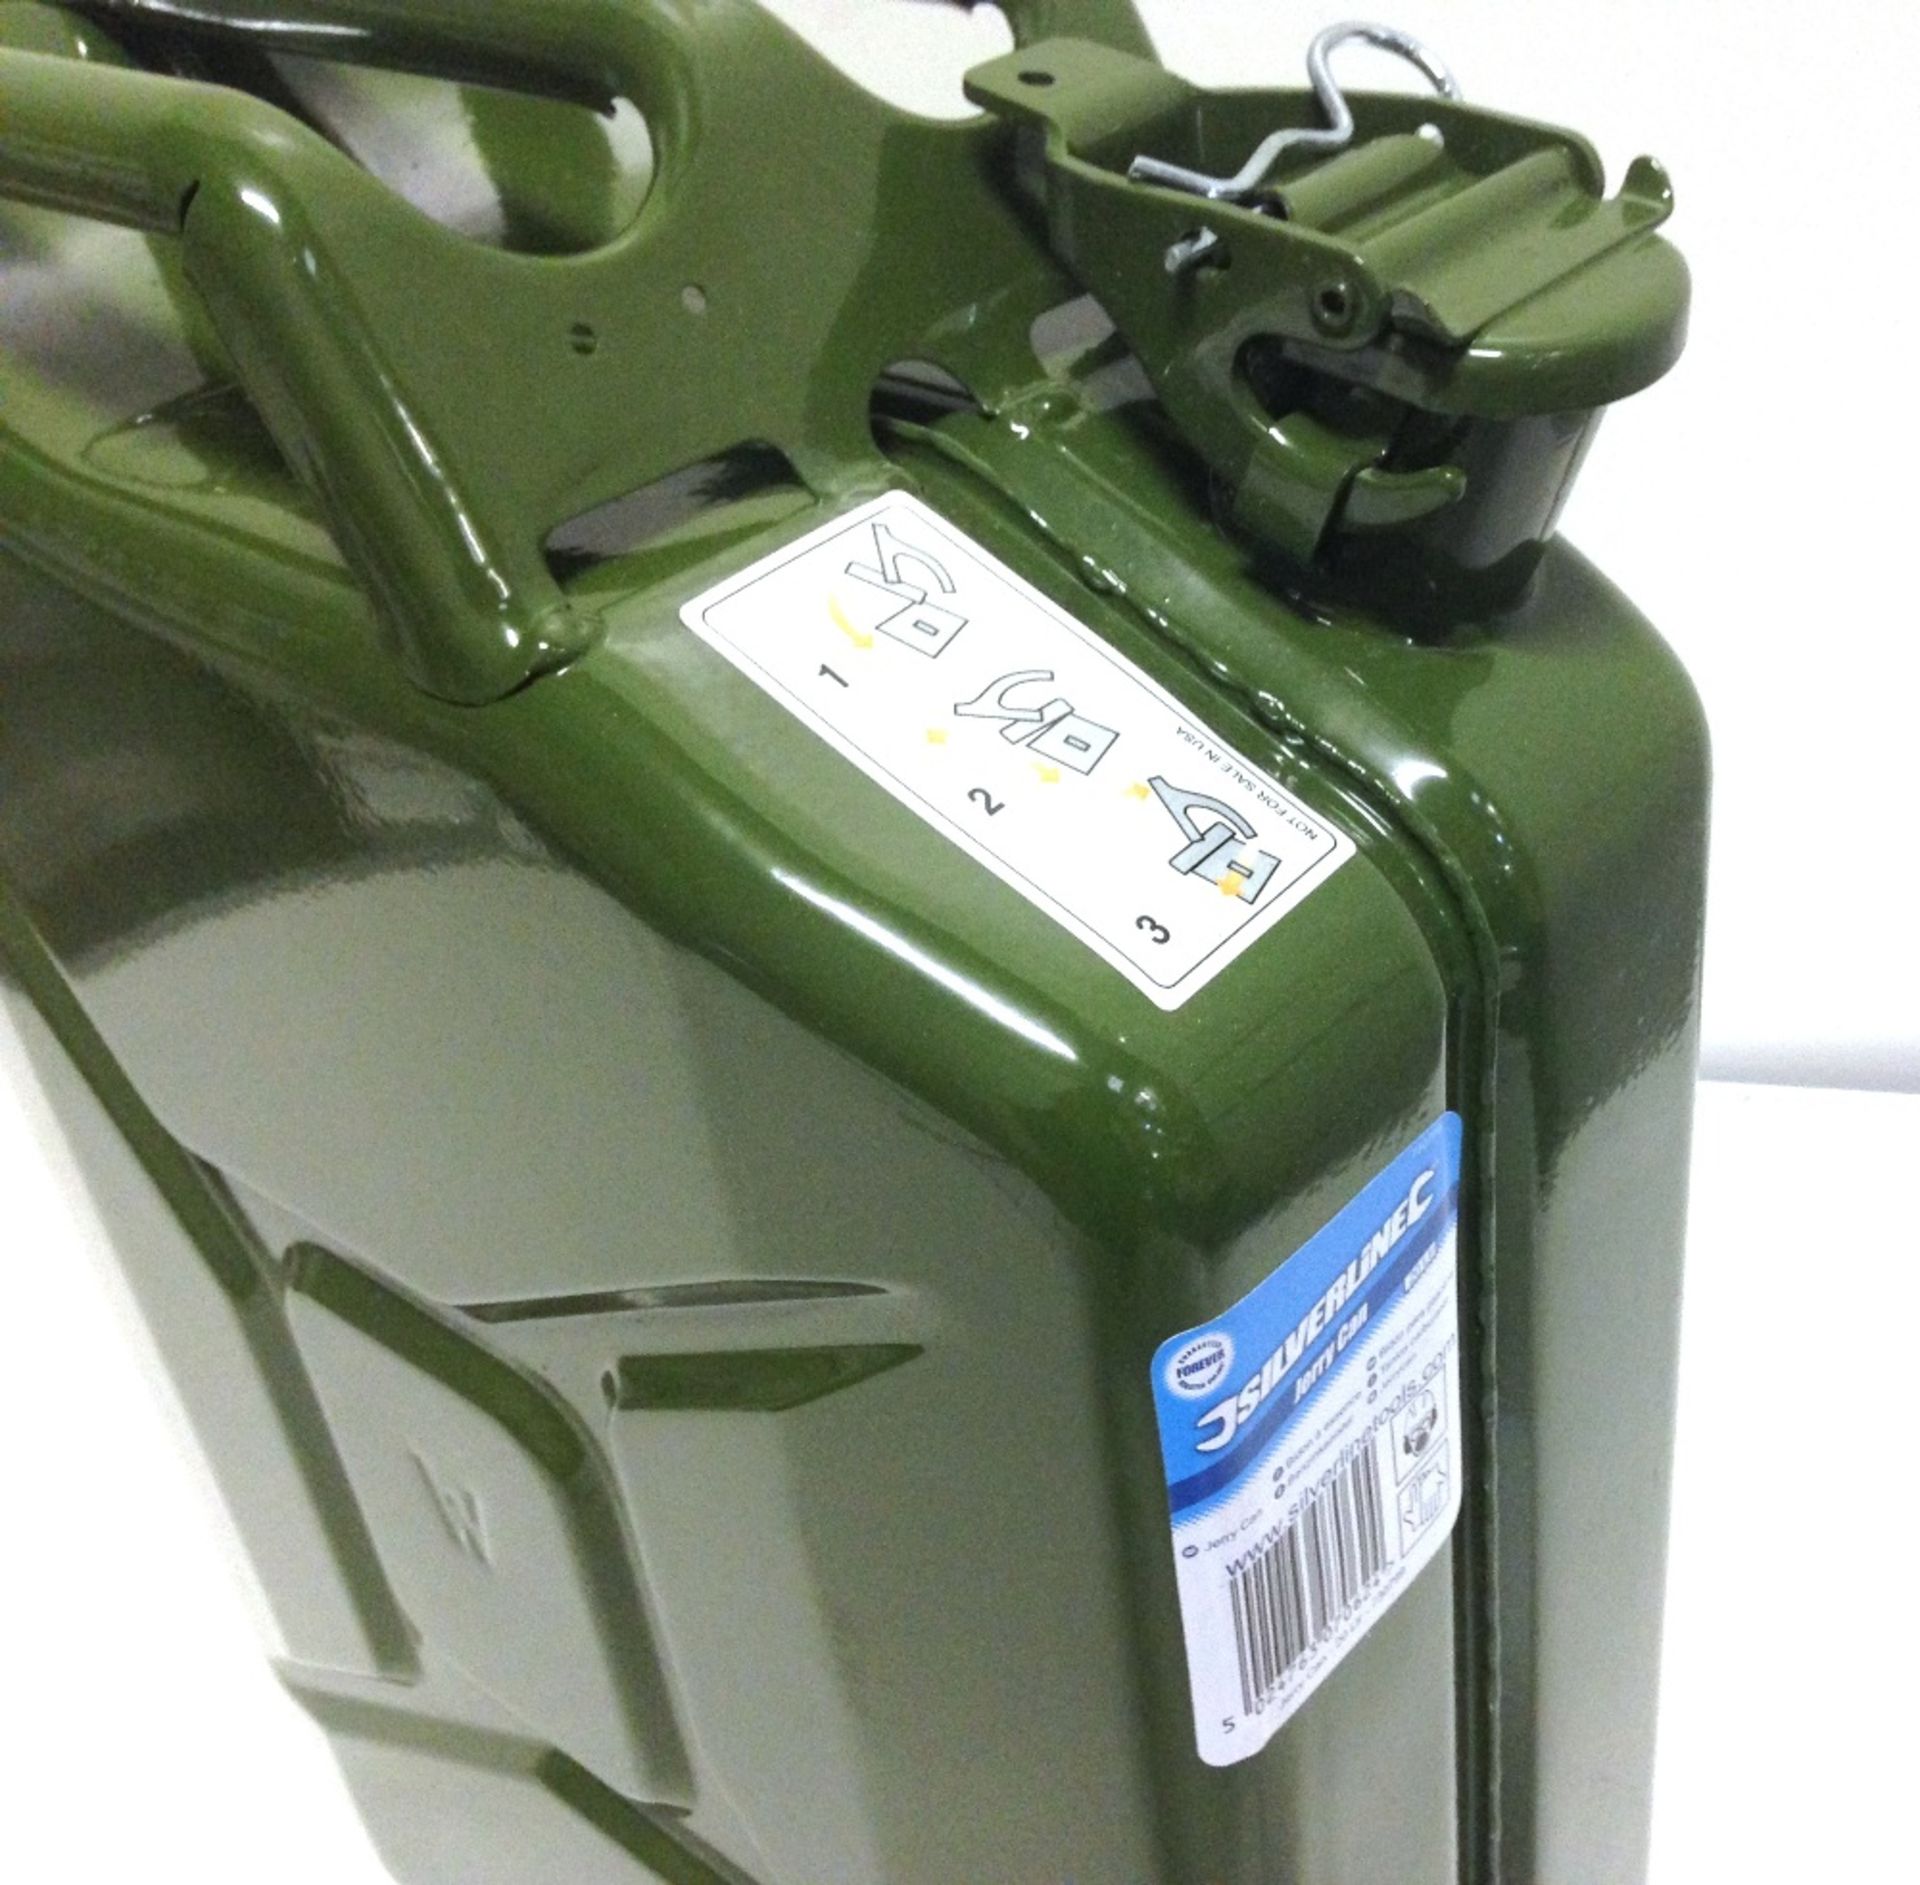 Silverline 20 litre green metal Gerry can unused - Image 2 of 2